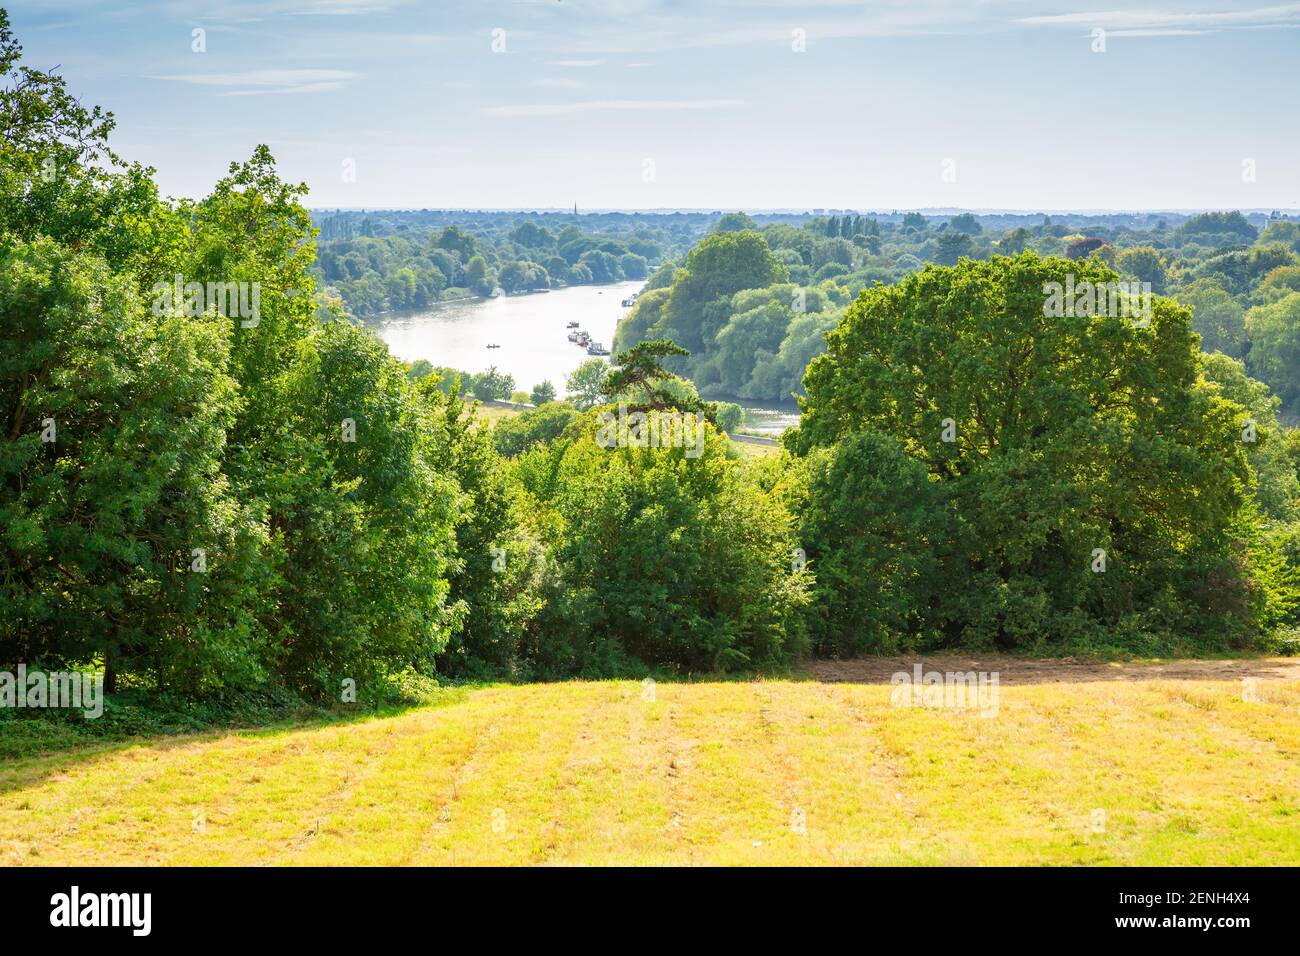 View of Thames river from Richmond Park, UK. Landscape with trees and field in sunny summer day. Stock Photo